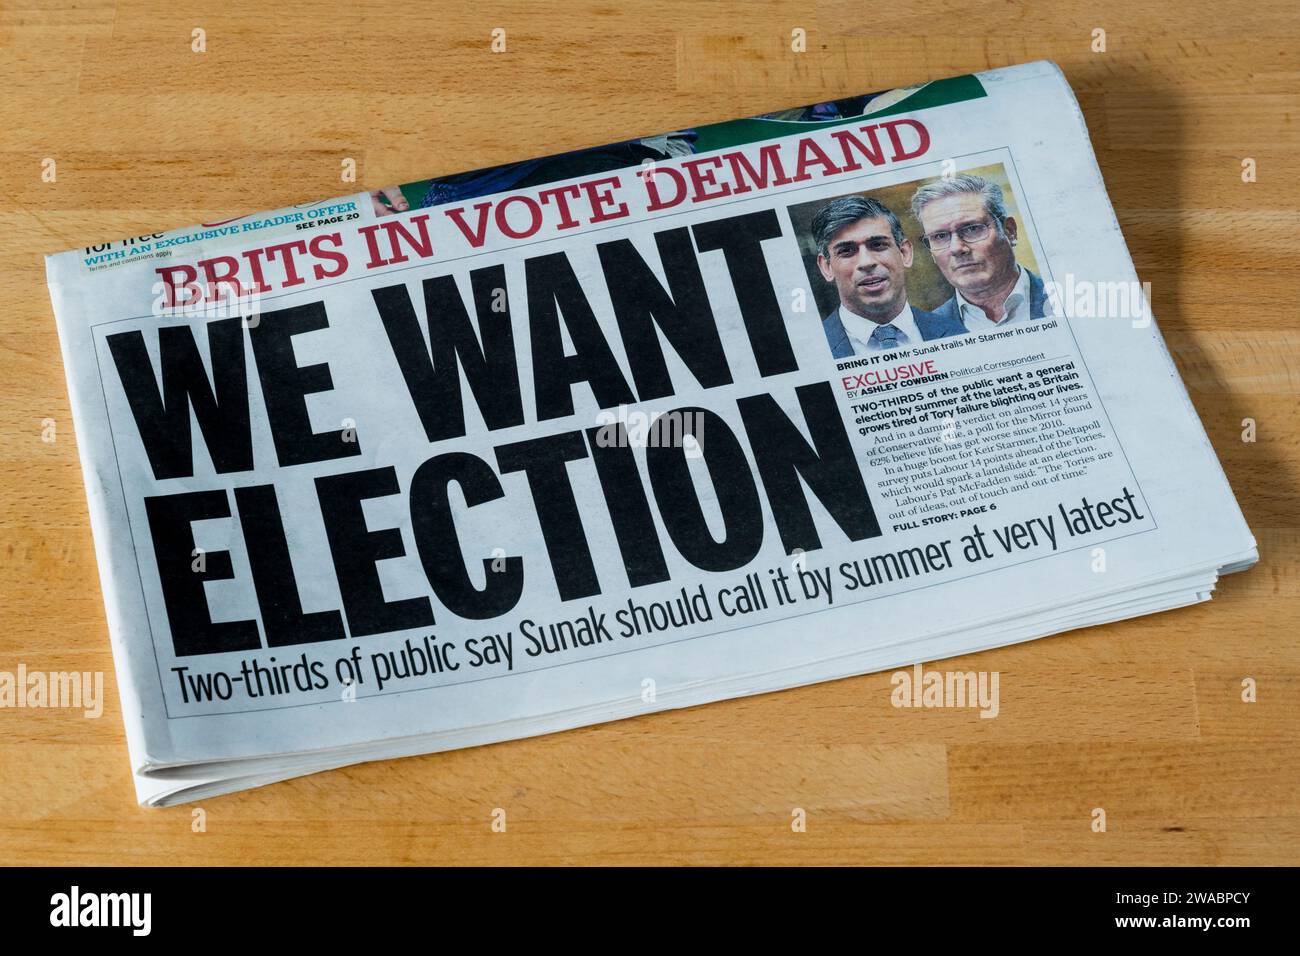 2 January 2024. Headline in Daily Mirror reads Brits in Vote Demand We Want Election. Stock Photo